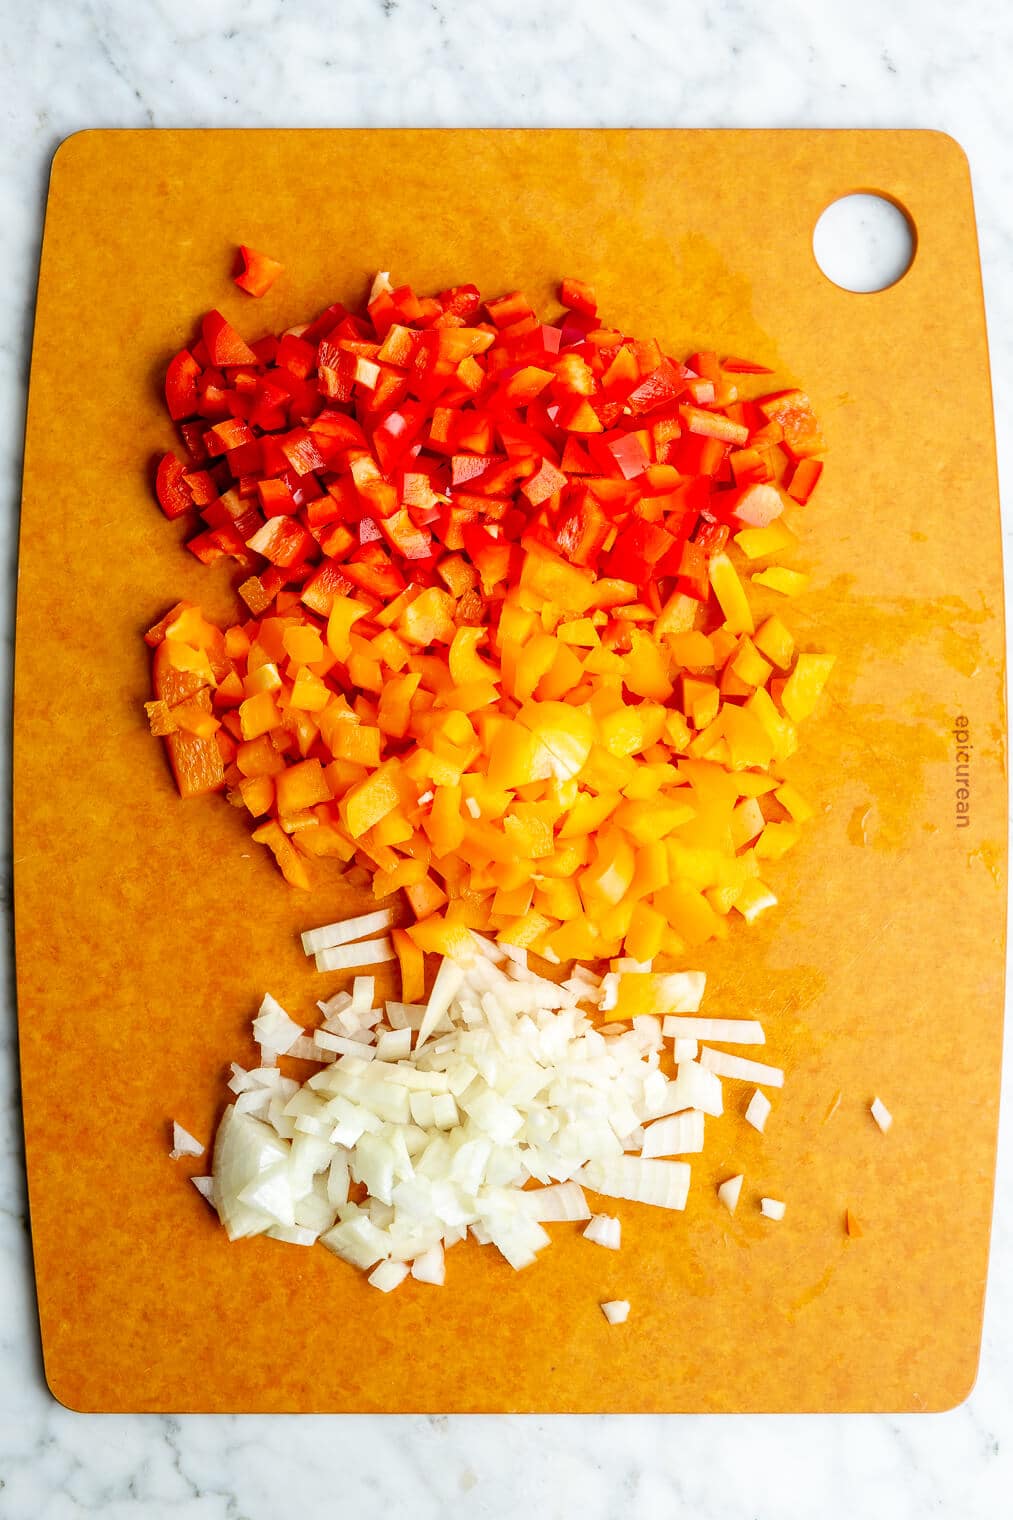 Diced red bell pepper, orange bell pepper, and white onion on an orange cutting board sitting on a marble surface.